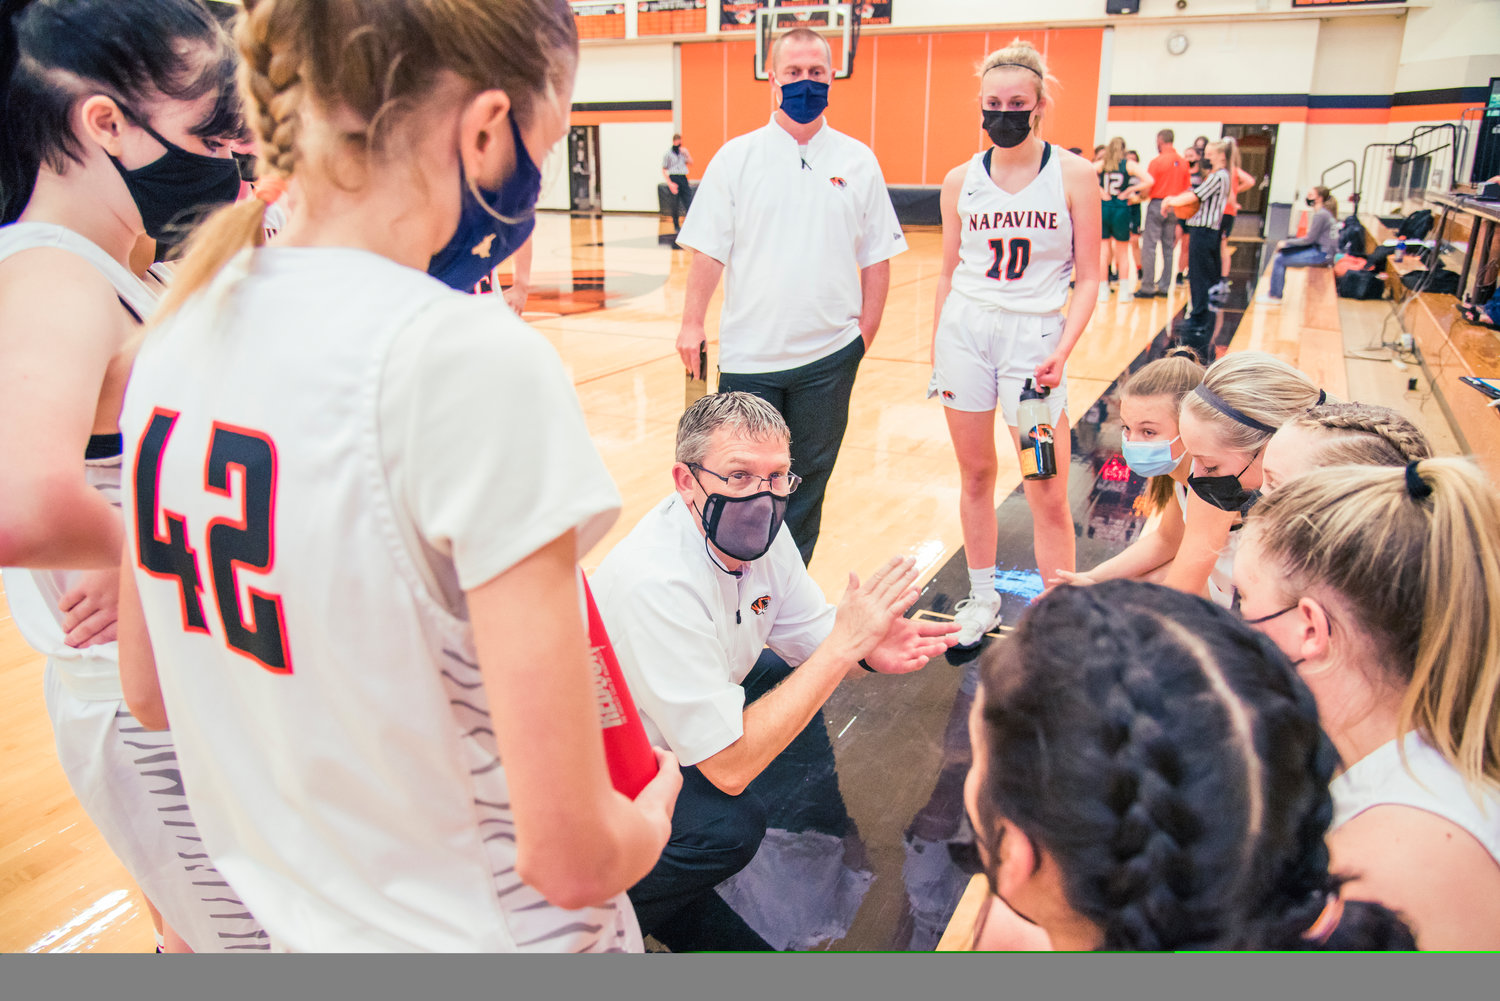 Napavine coach Shane Schutz goes over a gameplan with the Tigers during a timeout on Tuesday.